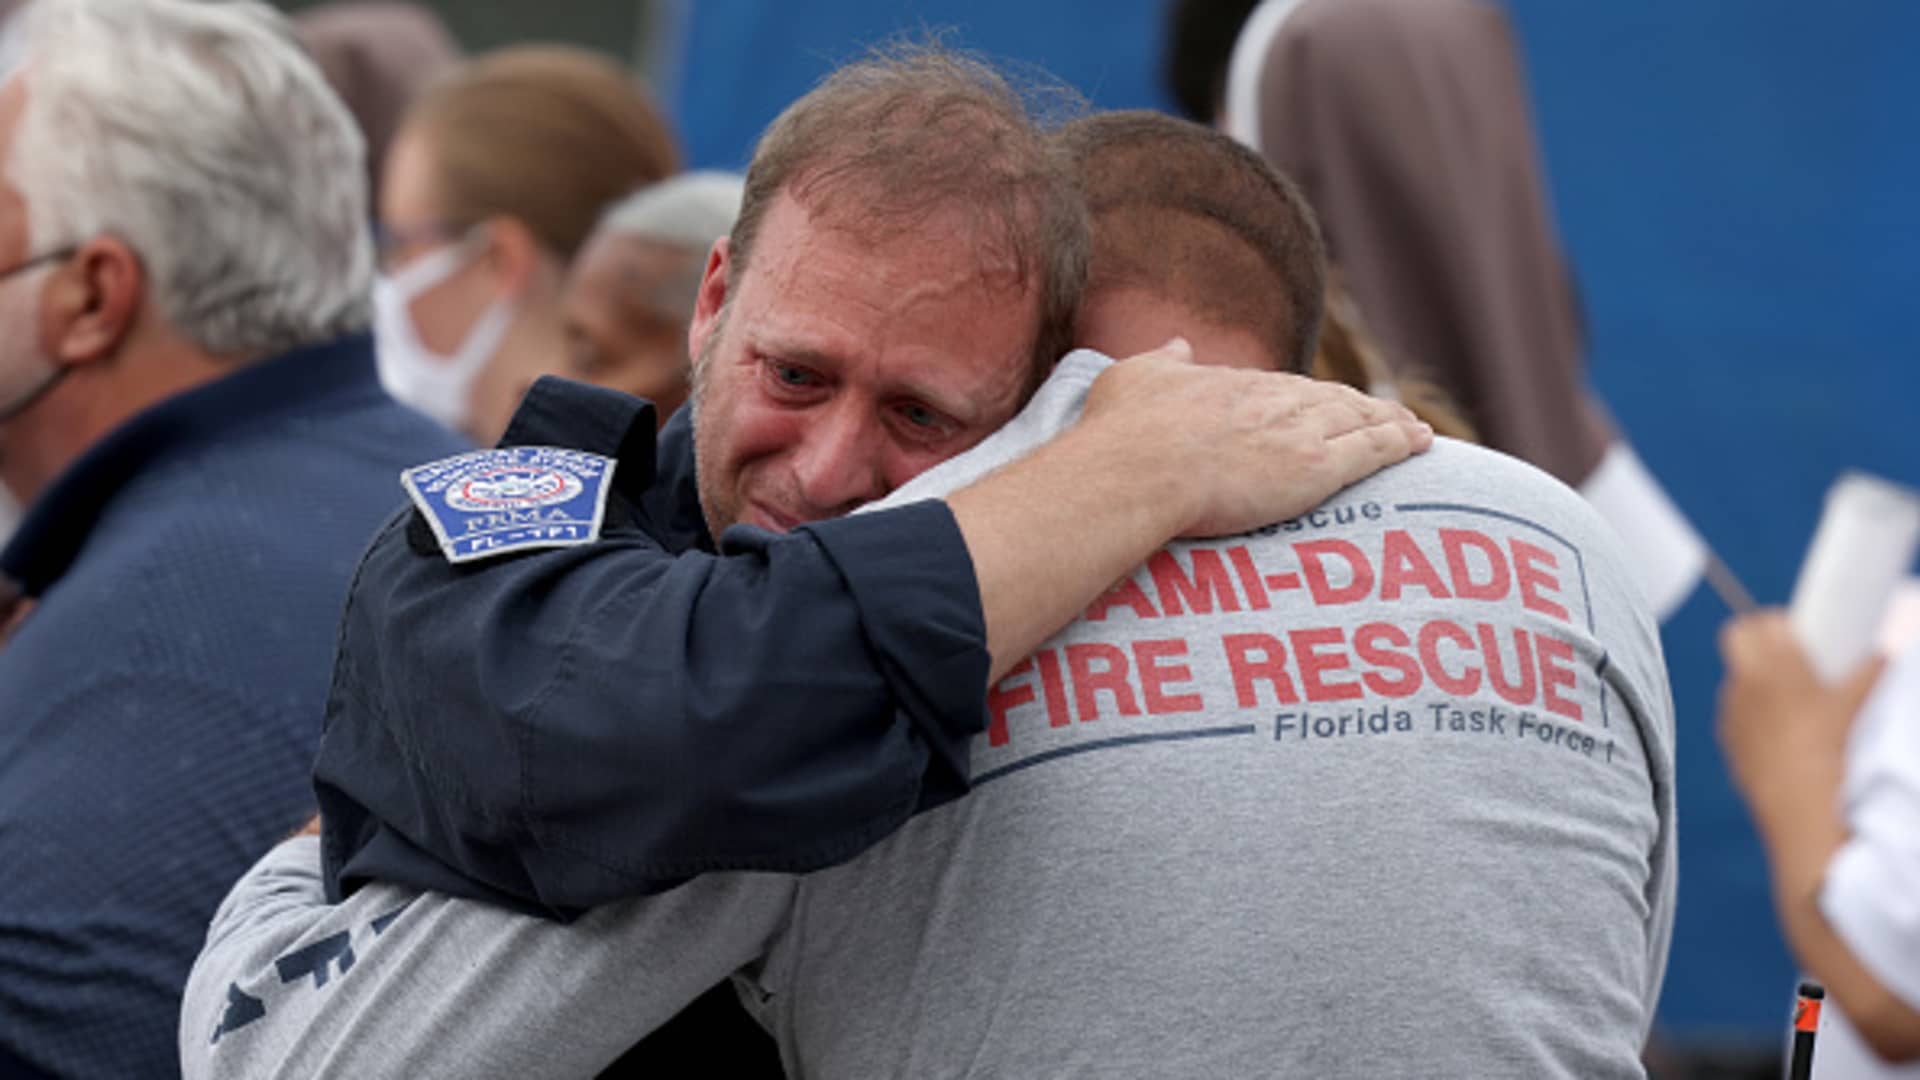 Rescue workers with the Miami Dade Fire Rescue embrace after a moment of silence near the memorial site for victims of the collapsed 12-story Champlain Towers South condo building on July 07, 2021 in Surfside, Florida.